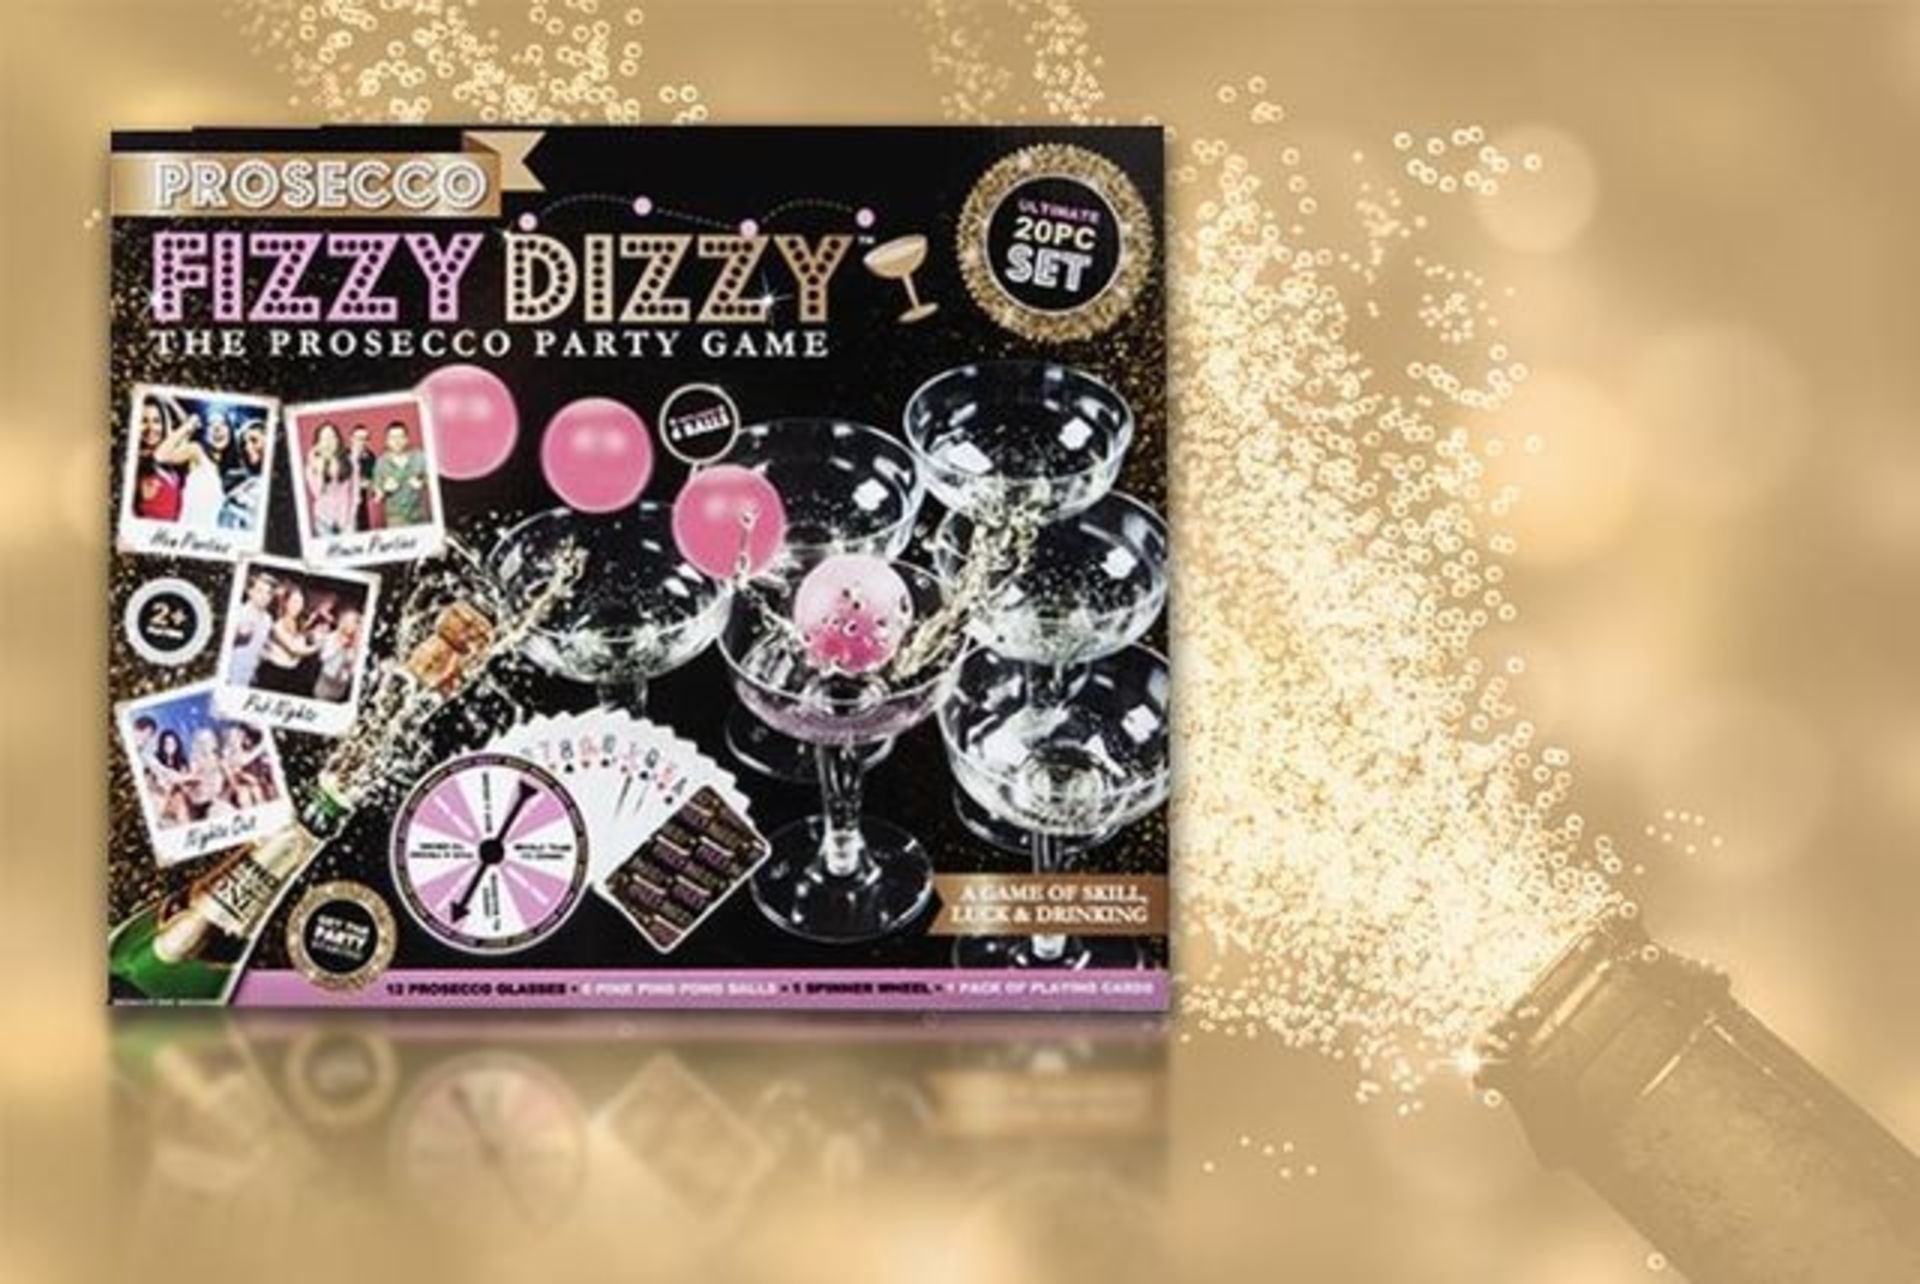 V Brand New Ultimate 20pce Fizzy Dizzy Prosecco Party Game-Includes Prosecco Glasses-Pink Ping